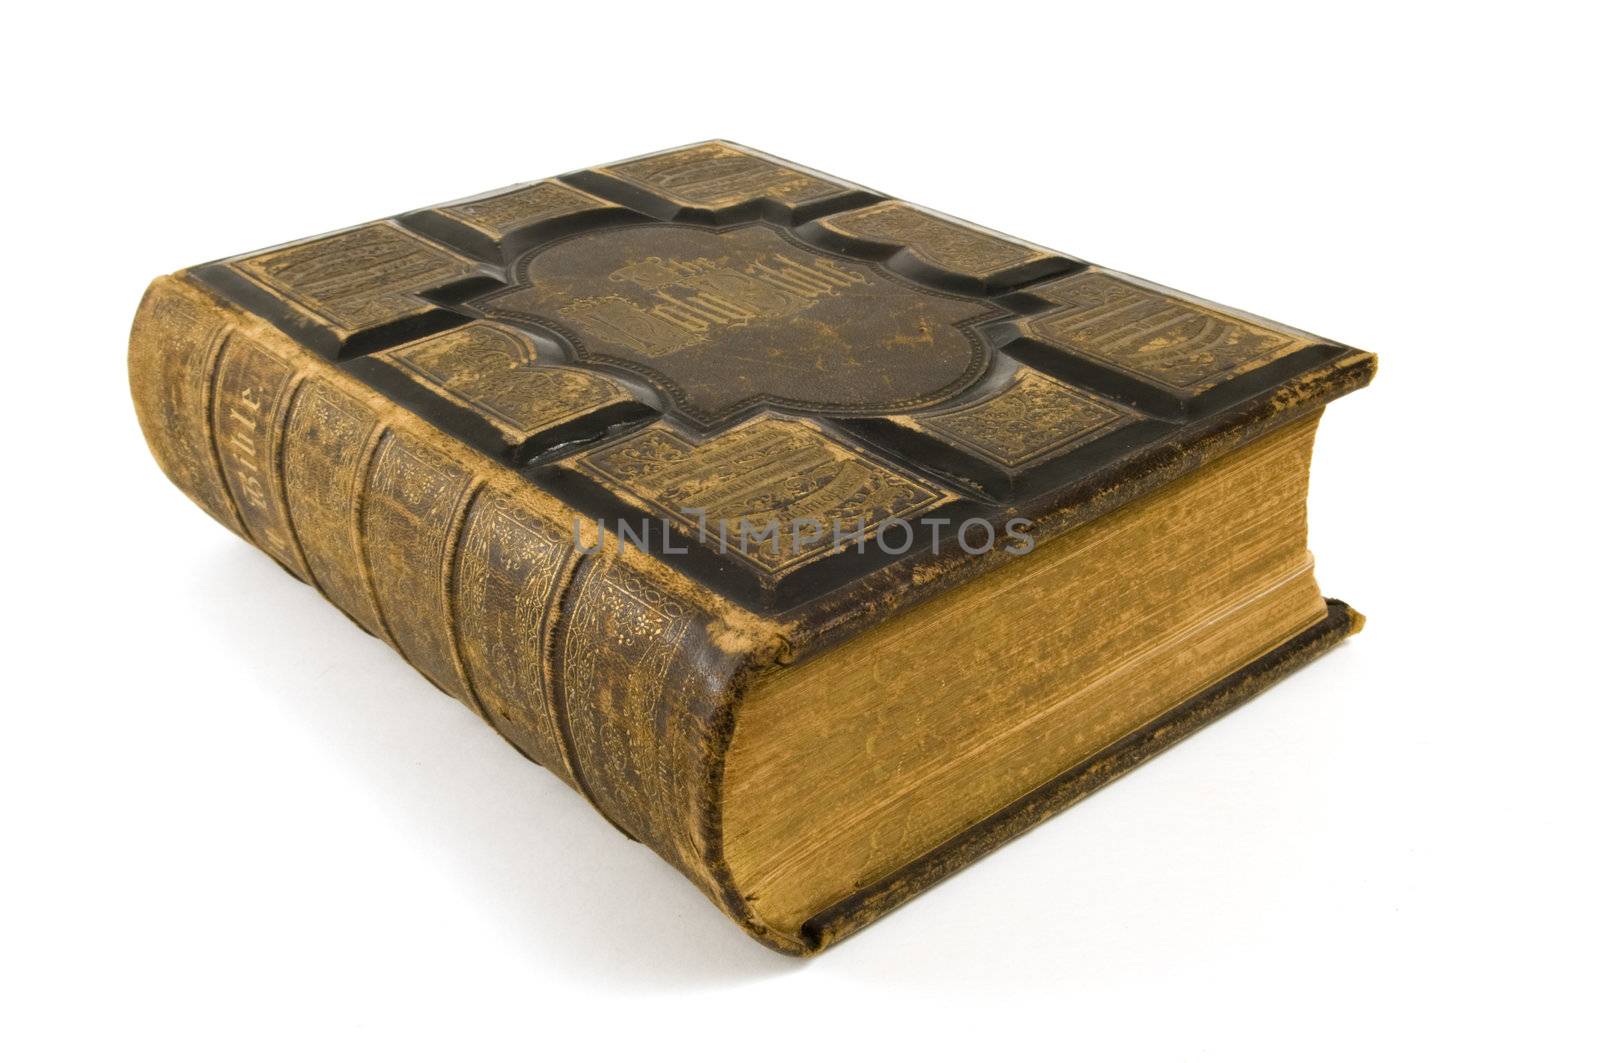 Large old bible on white background